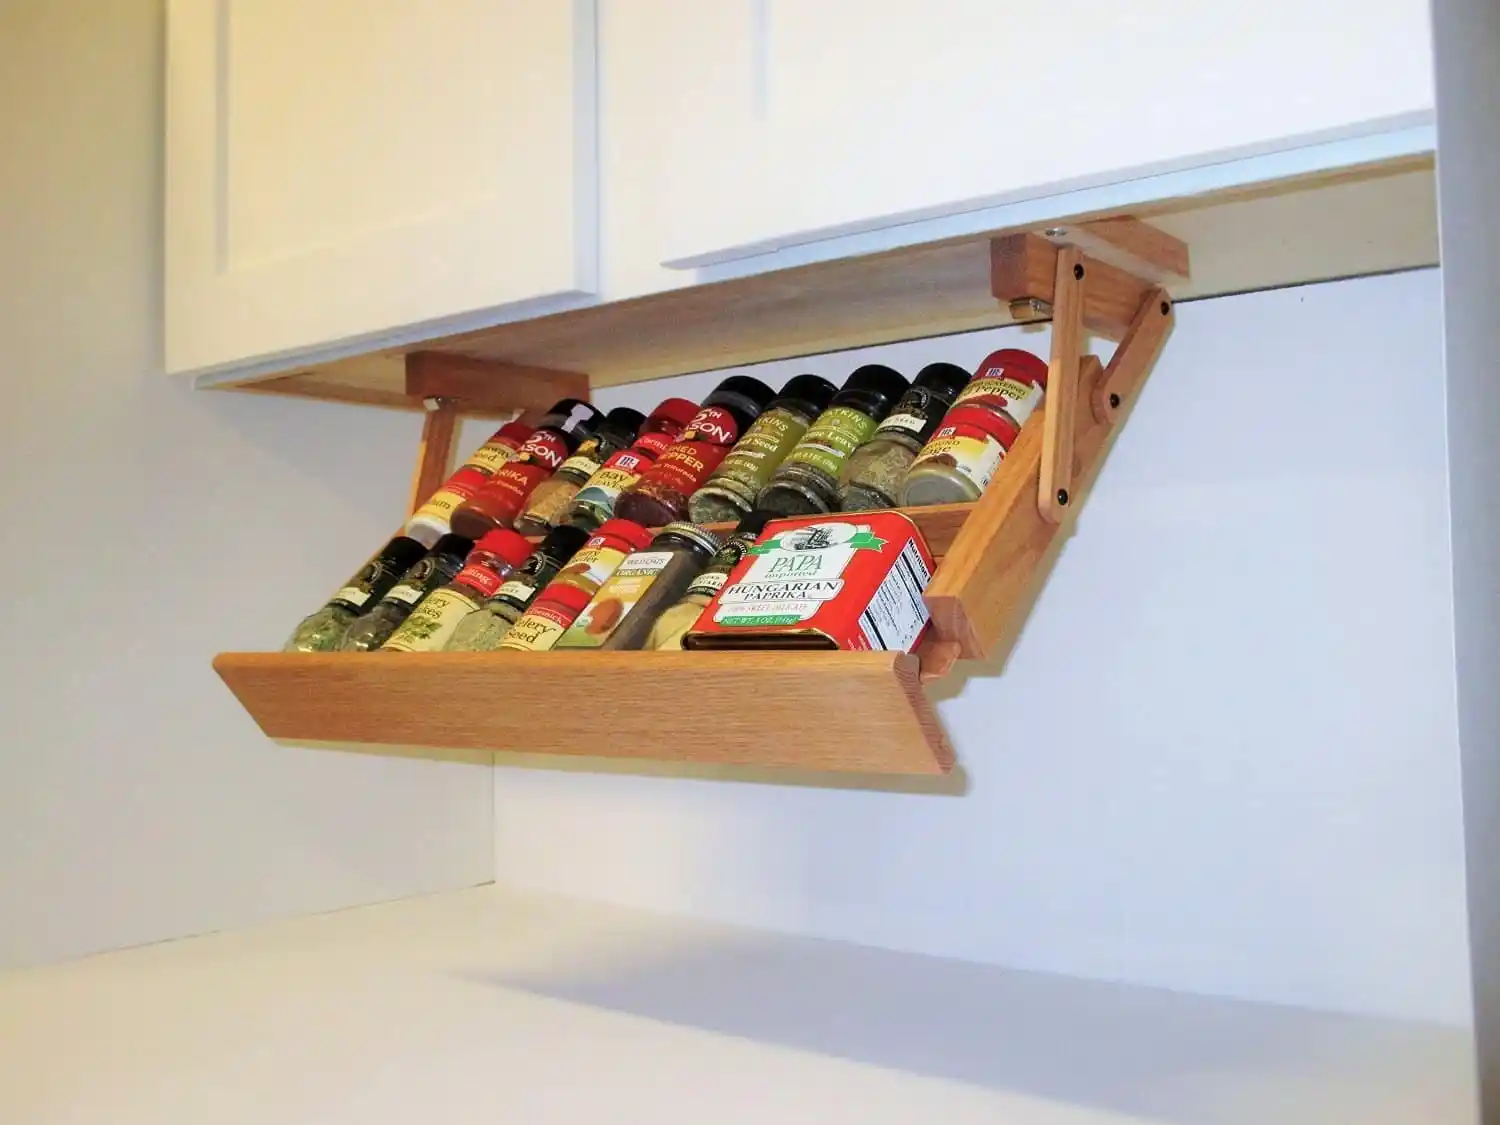 Organizing Spices: 10 Ways To Keep Spices Organized